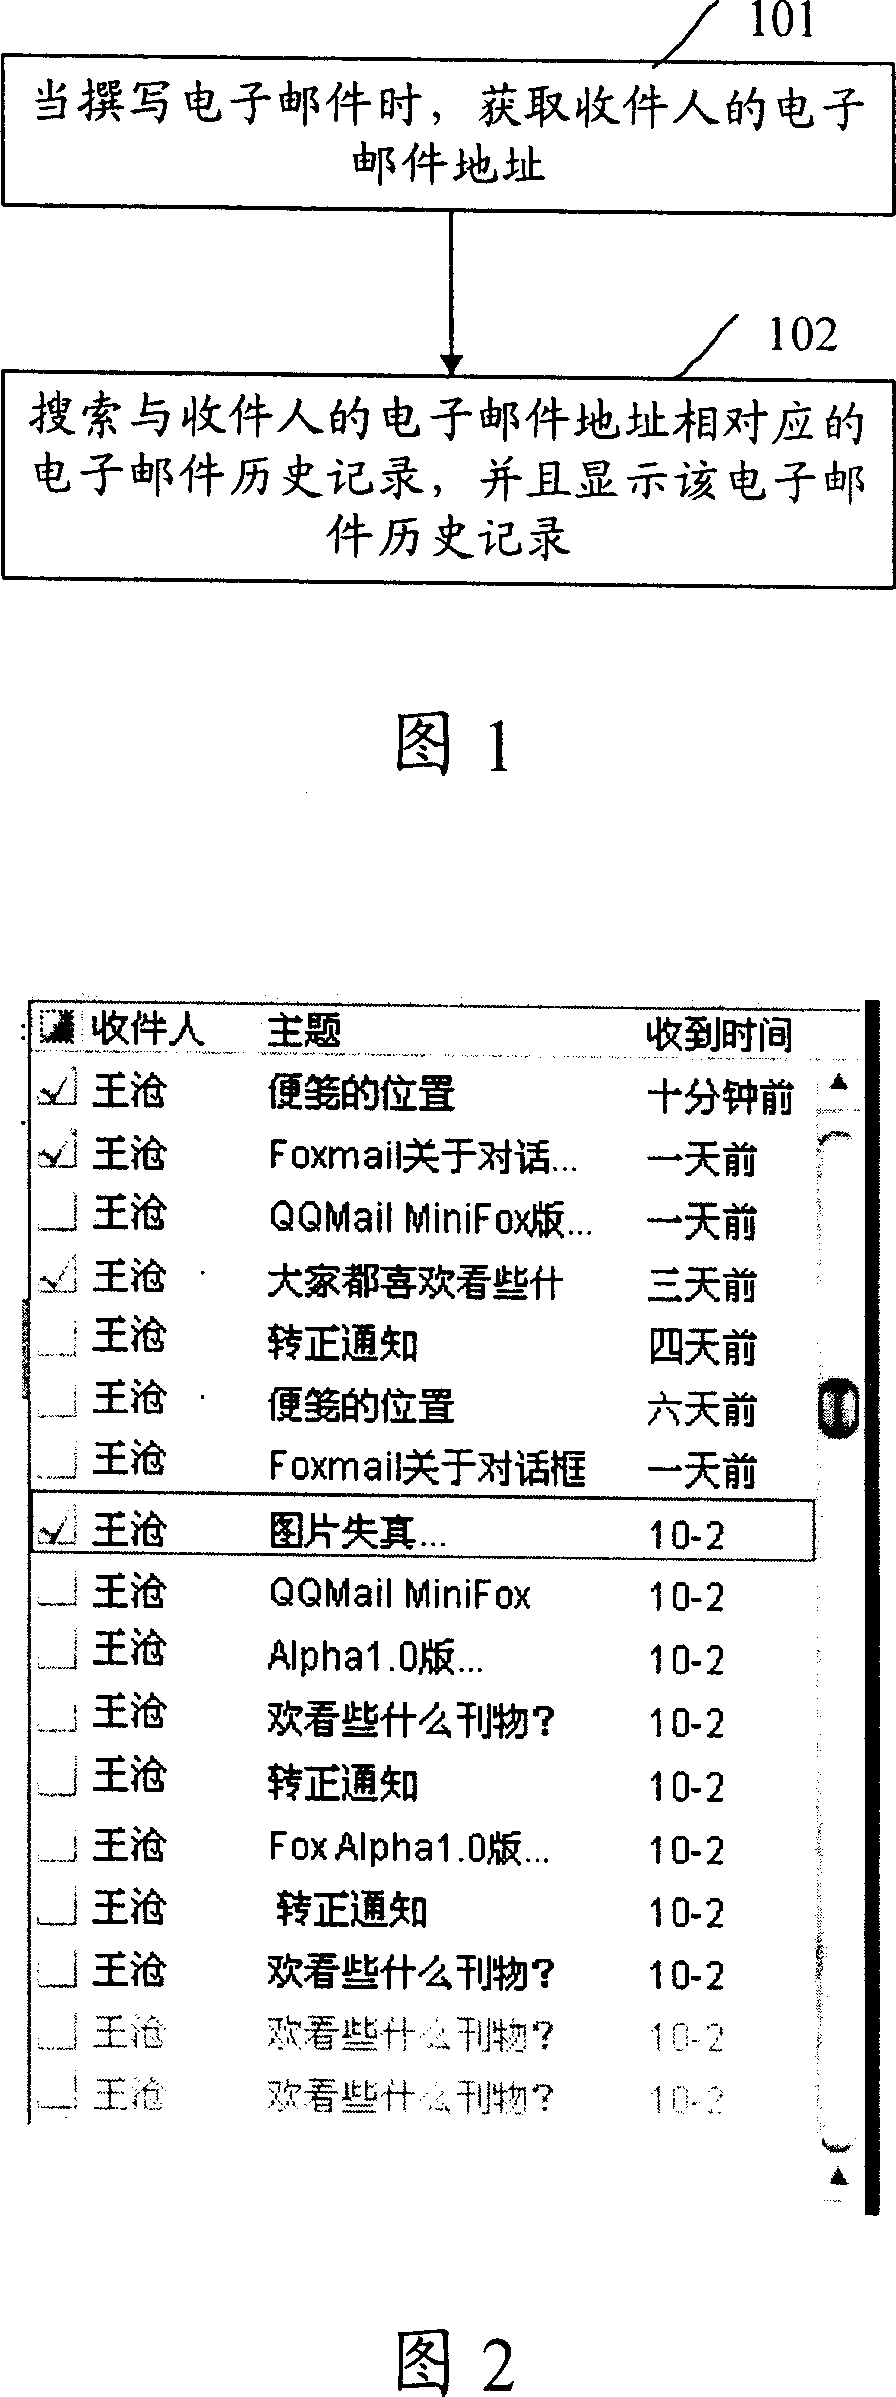 Method and system for displaying history of e-mail